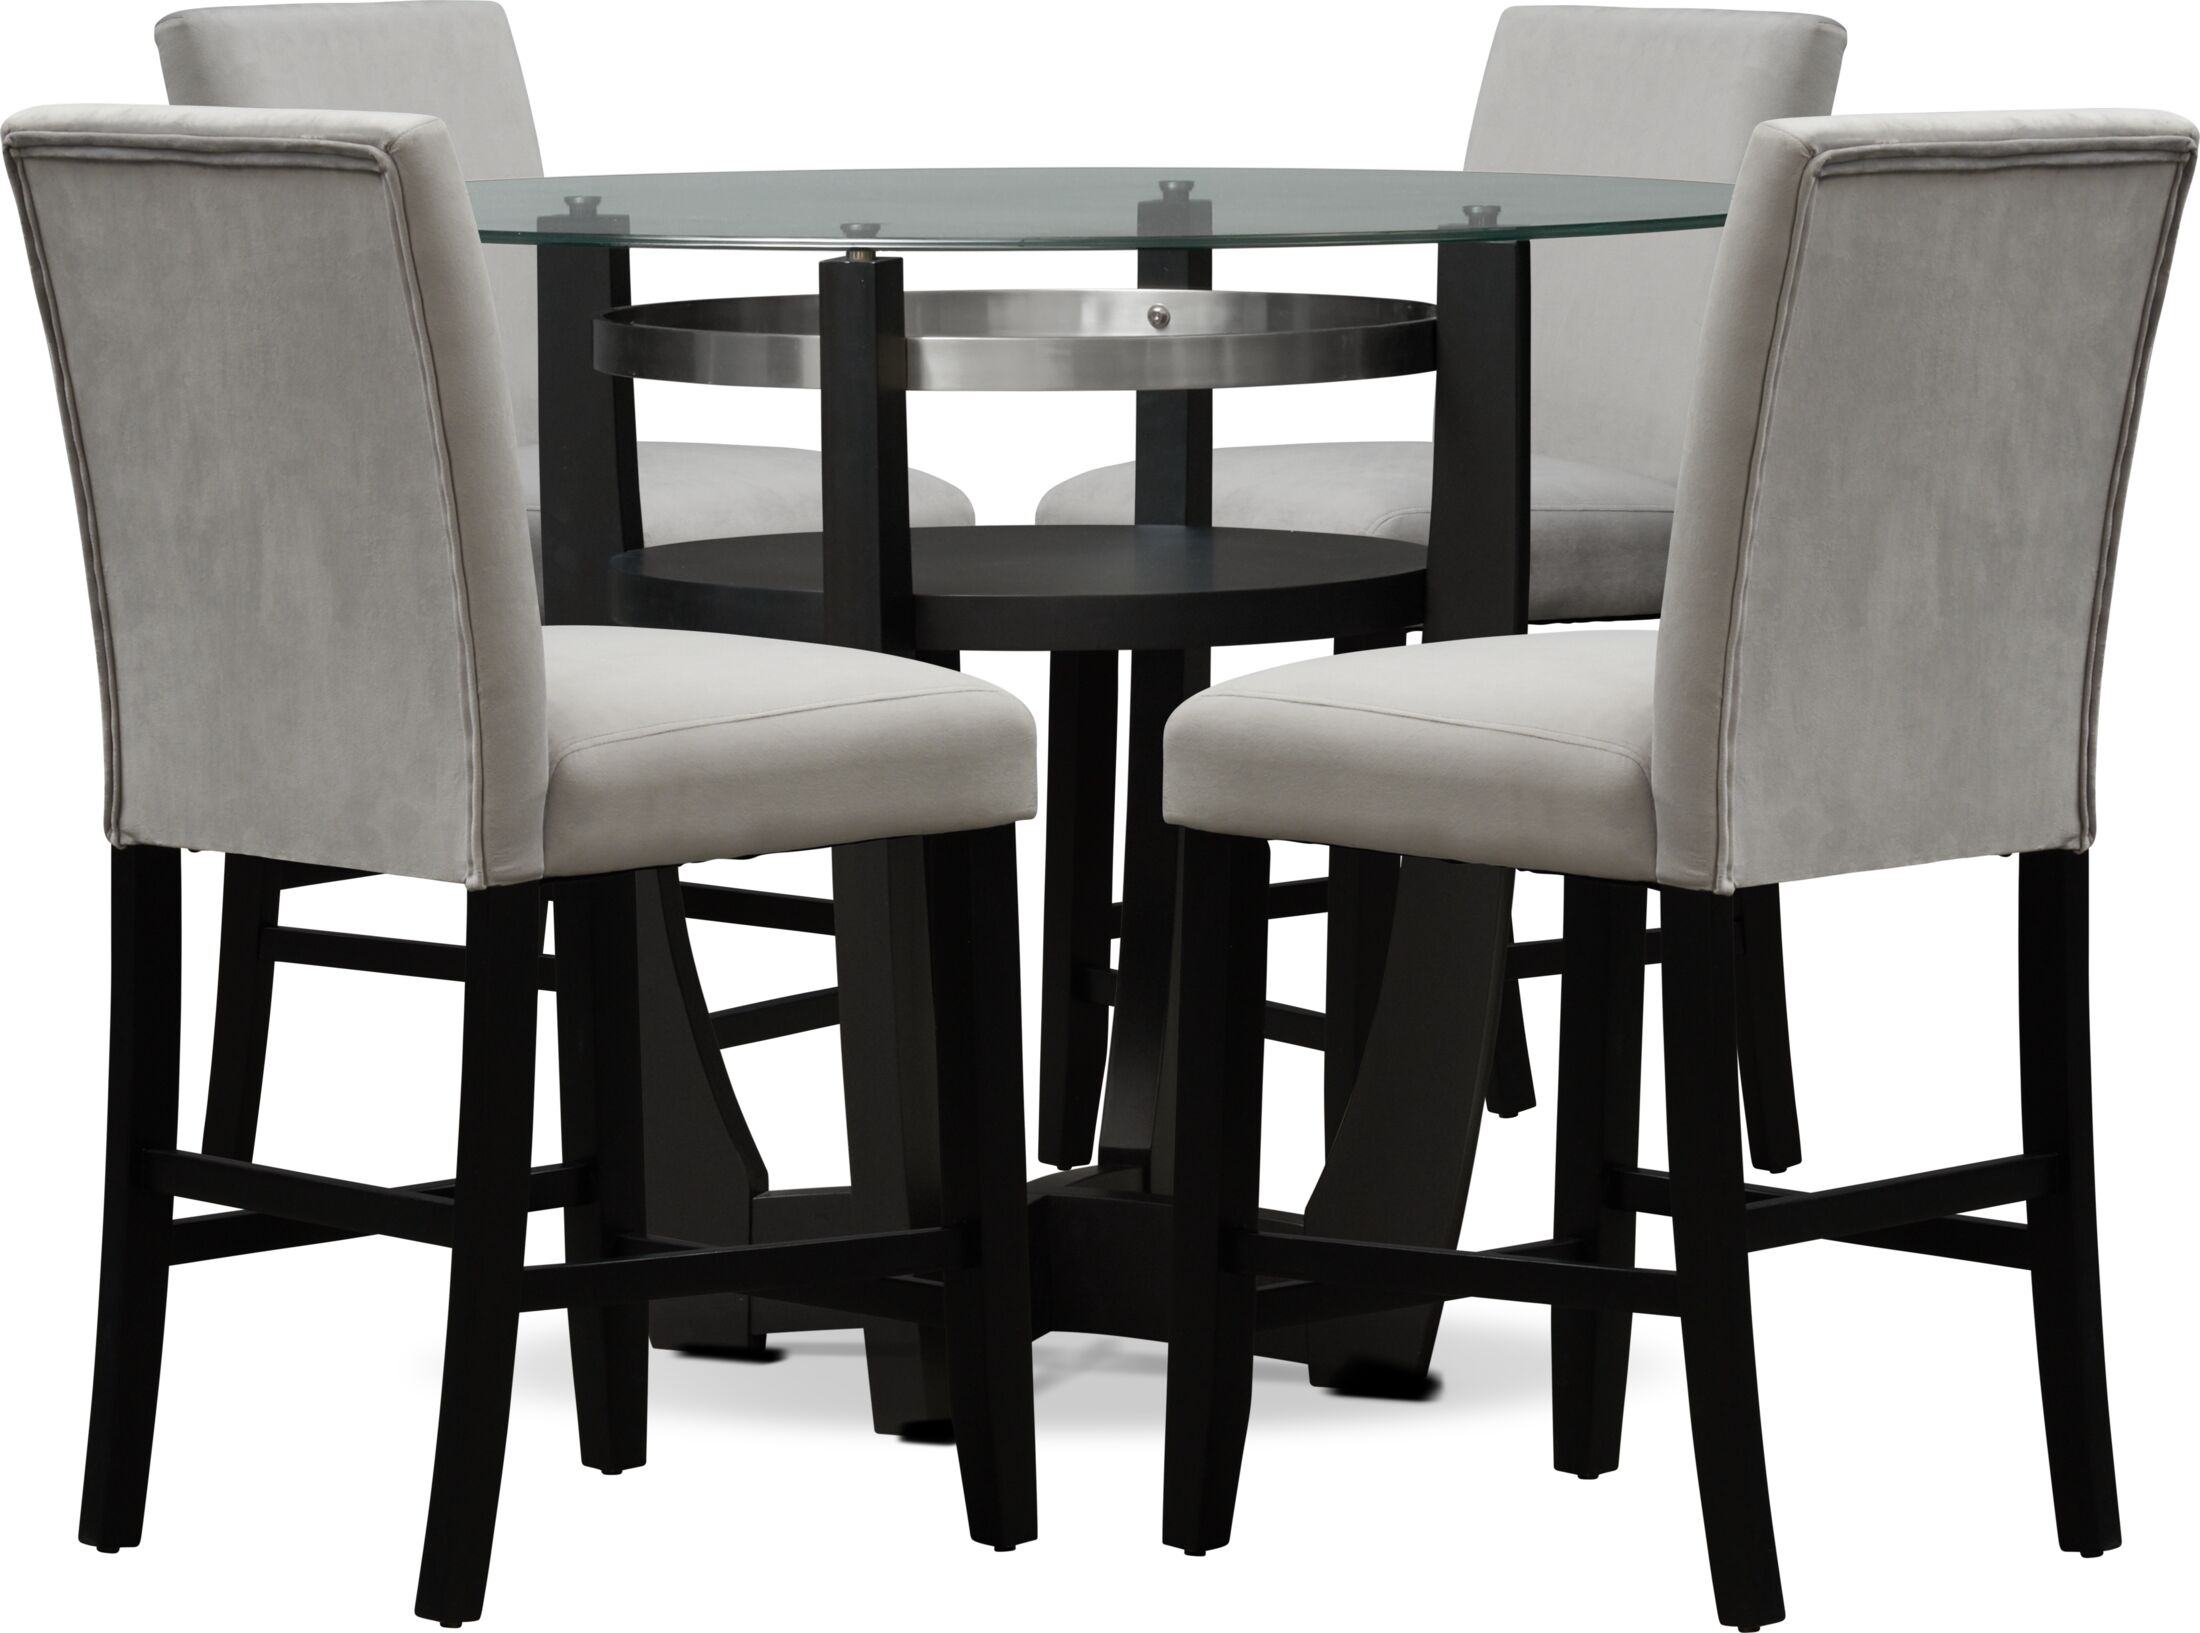 Undefined Value City Furniture, Should I Get A Counter Height Dining Table